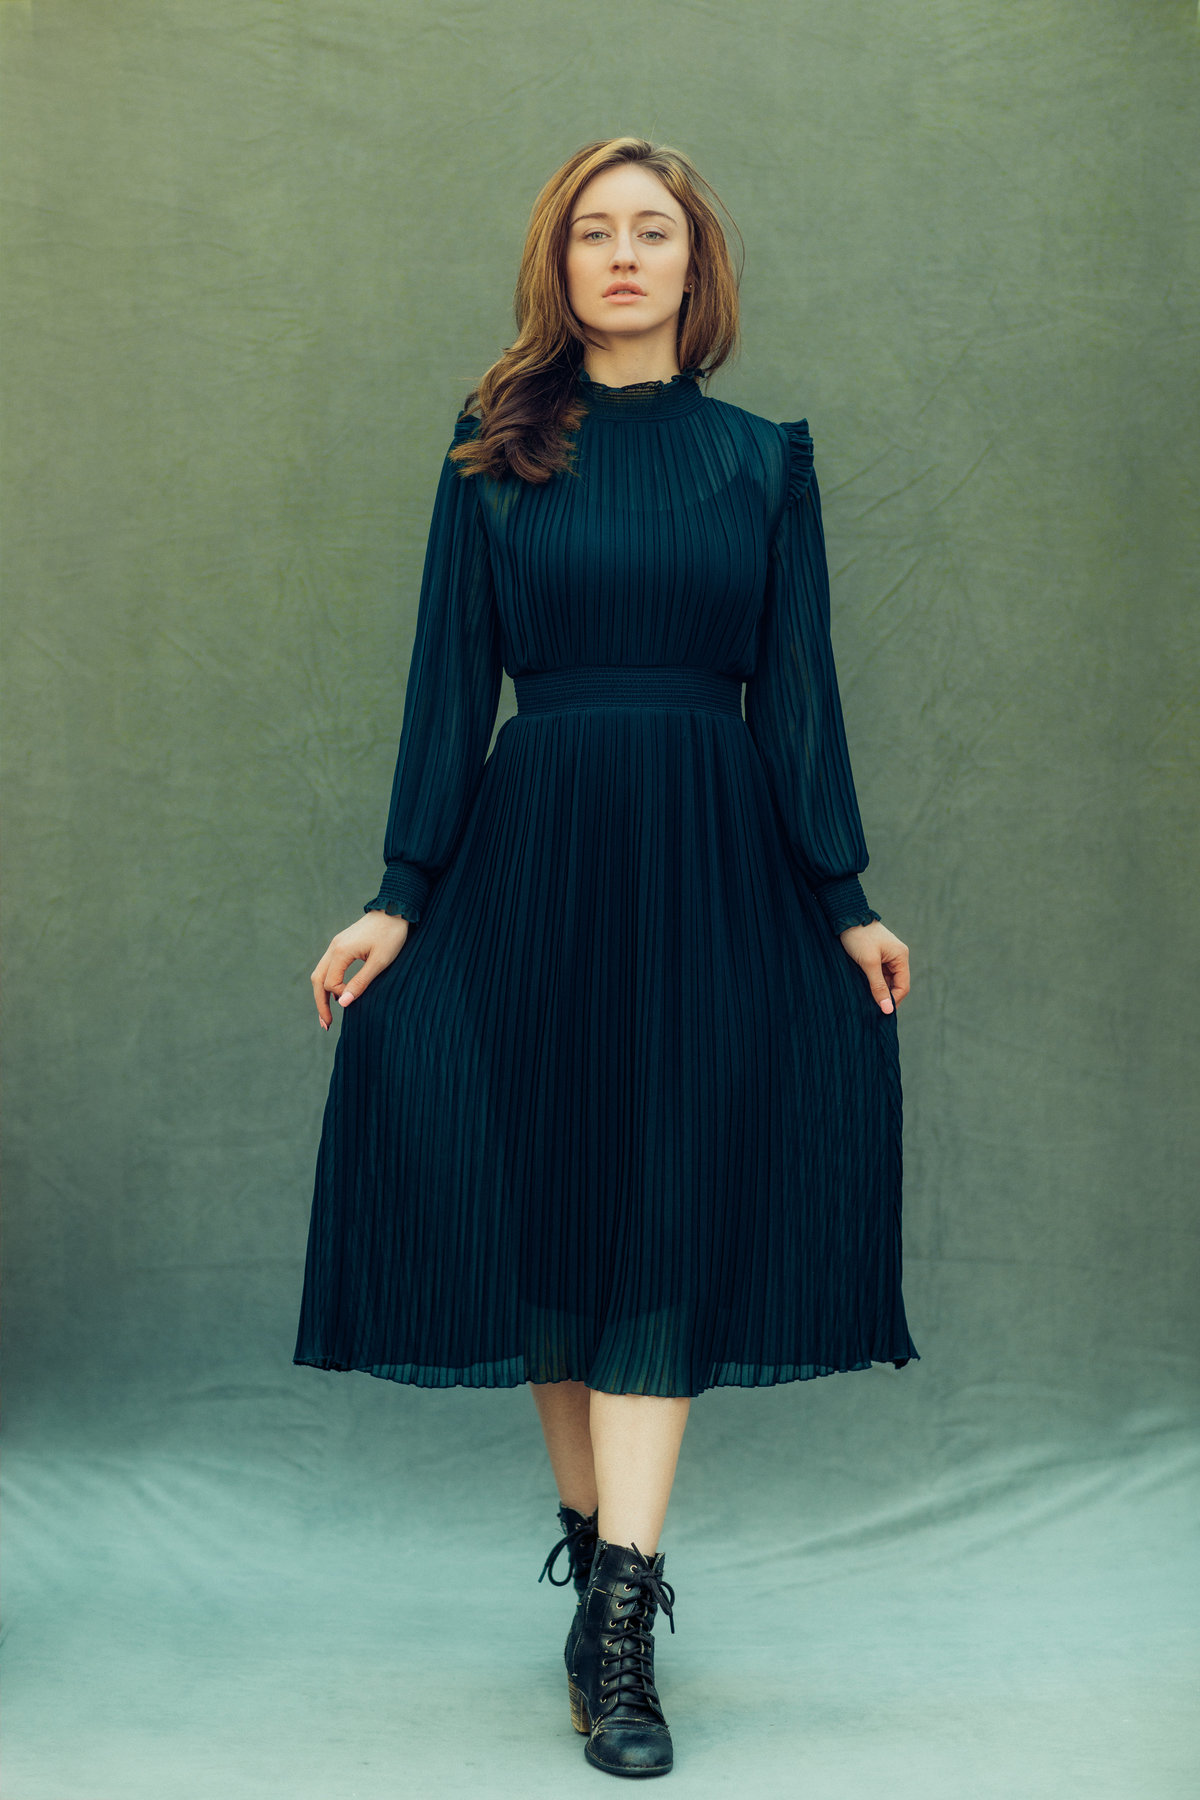 Portrait Photo Of Young Woman Holding Her Black Dress Los Angeles